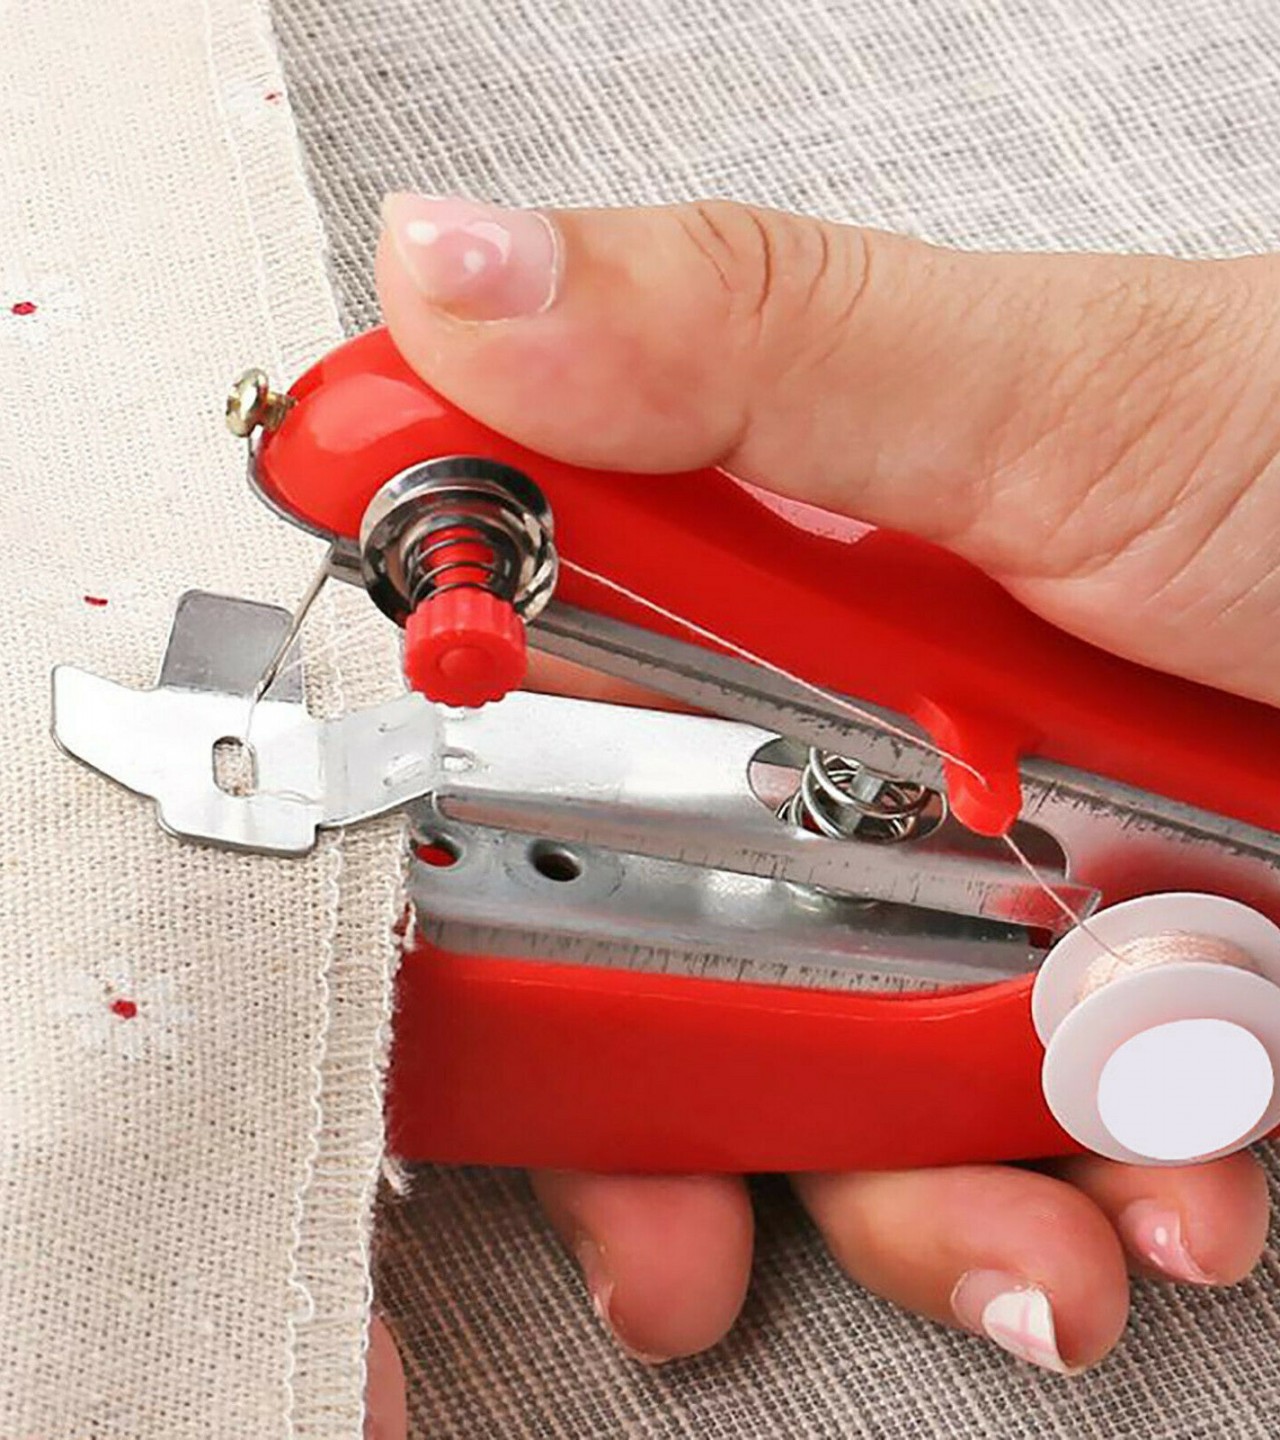 Portable Mini Household Stitch Clothes Fabric Sewing Tool For Use Home Travel - Multi